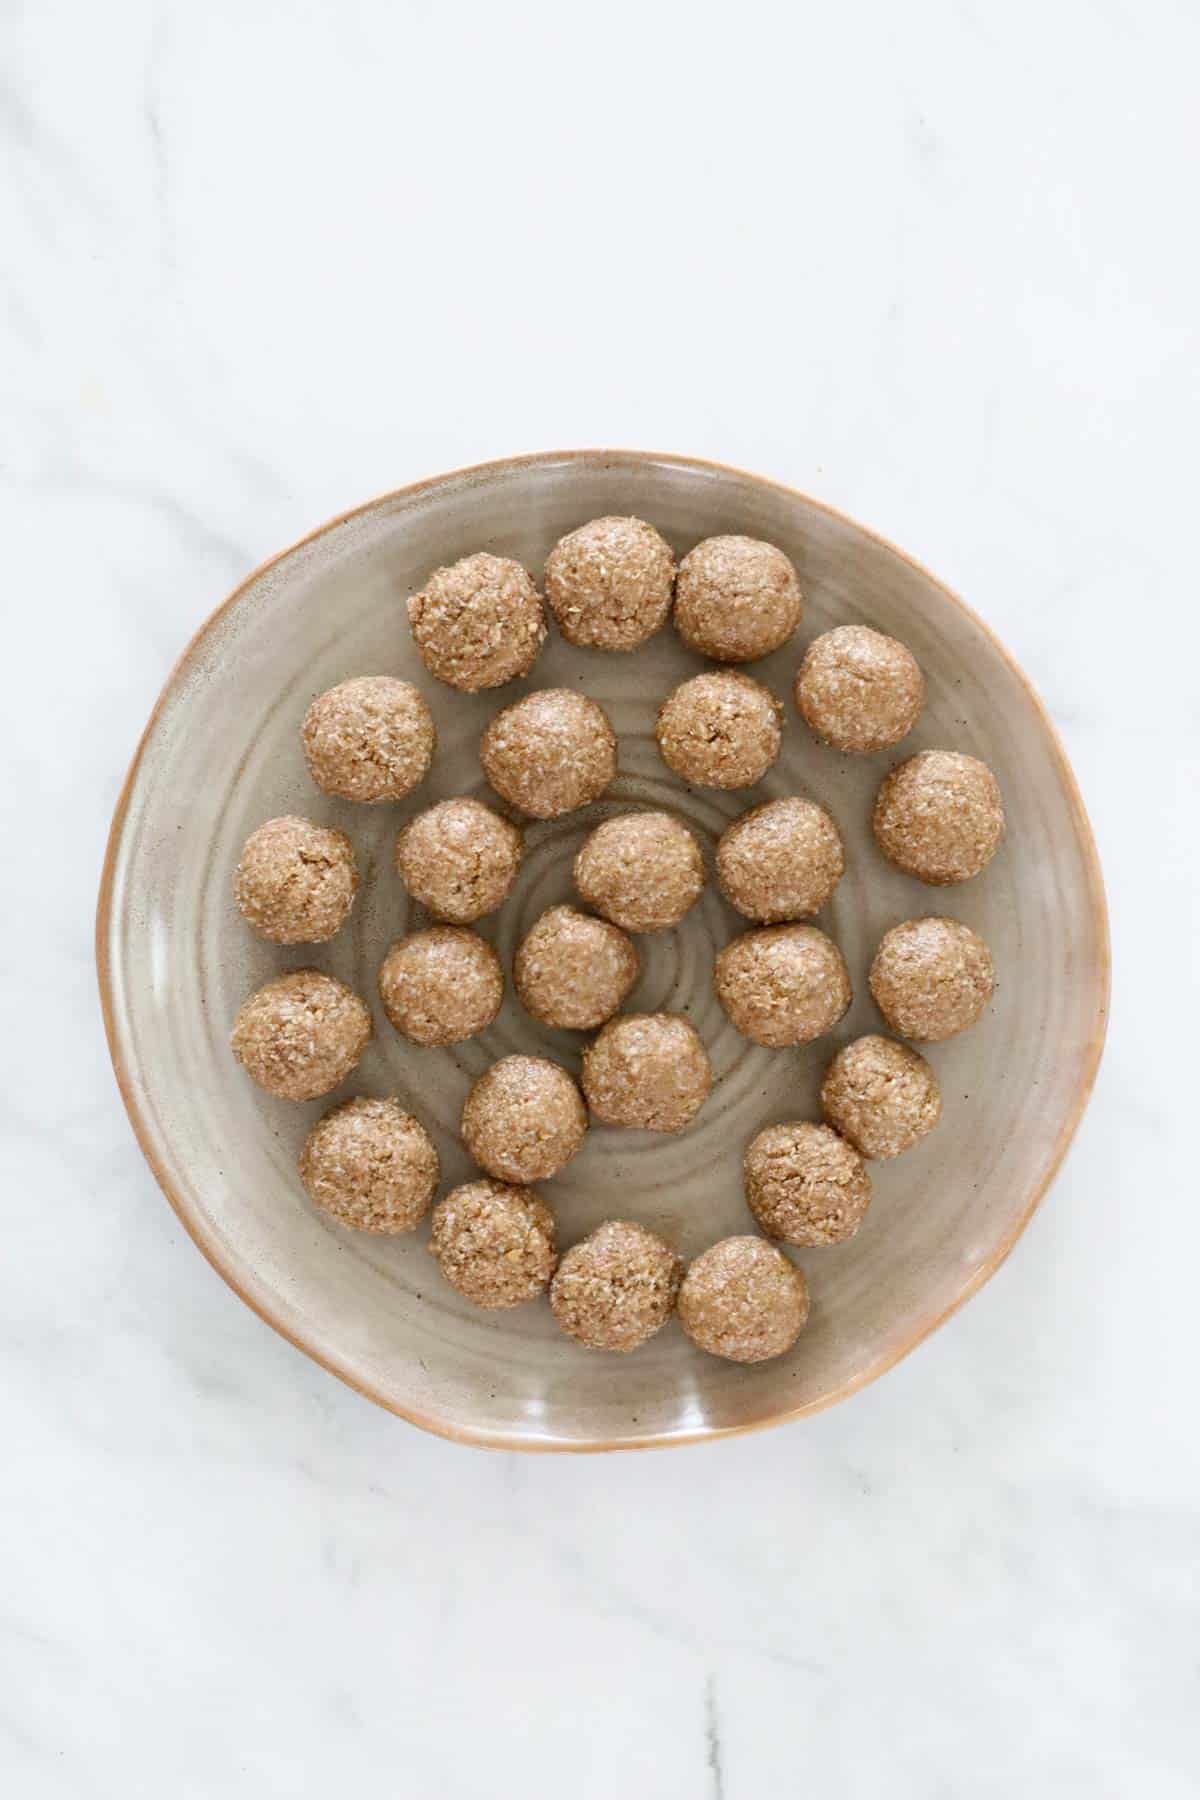 Small rolled kids protein balls on a plate.